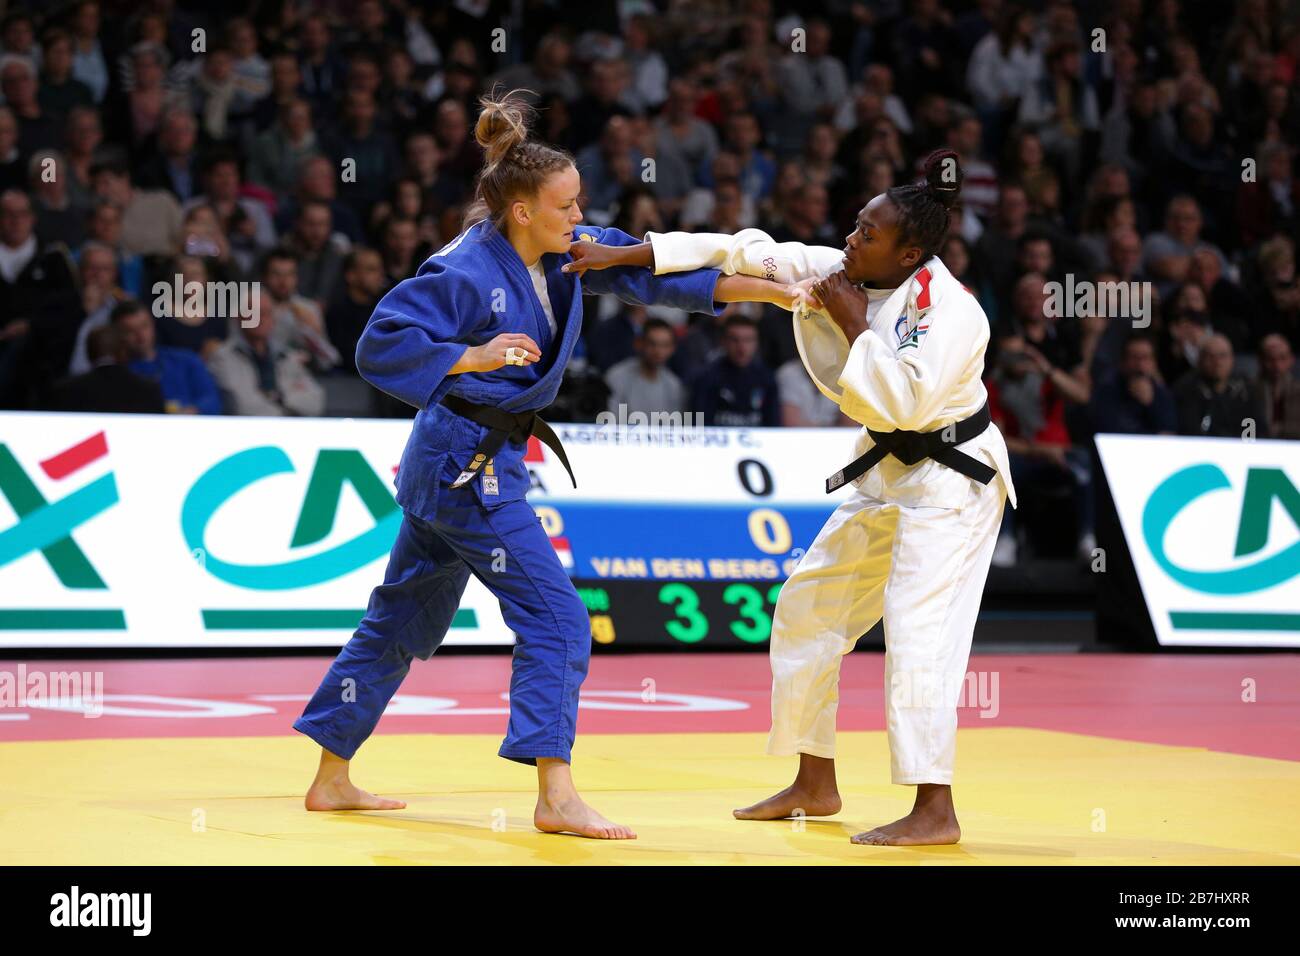 Paris, France - 08th Feb, 2020: Clarisse Agbegnenou for France against Van den Berg for Netherlands, Women's -63 kg, Round three (Credit: Mickael Chavet) Stock Photo